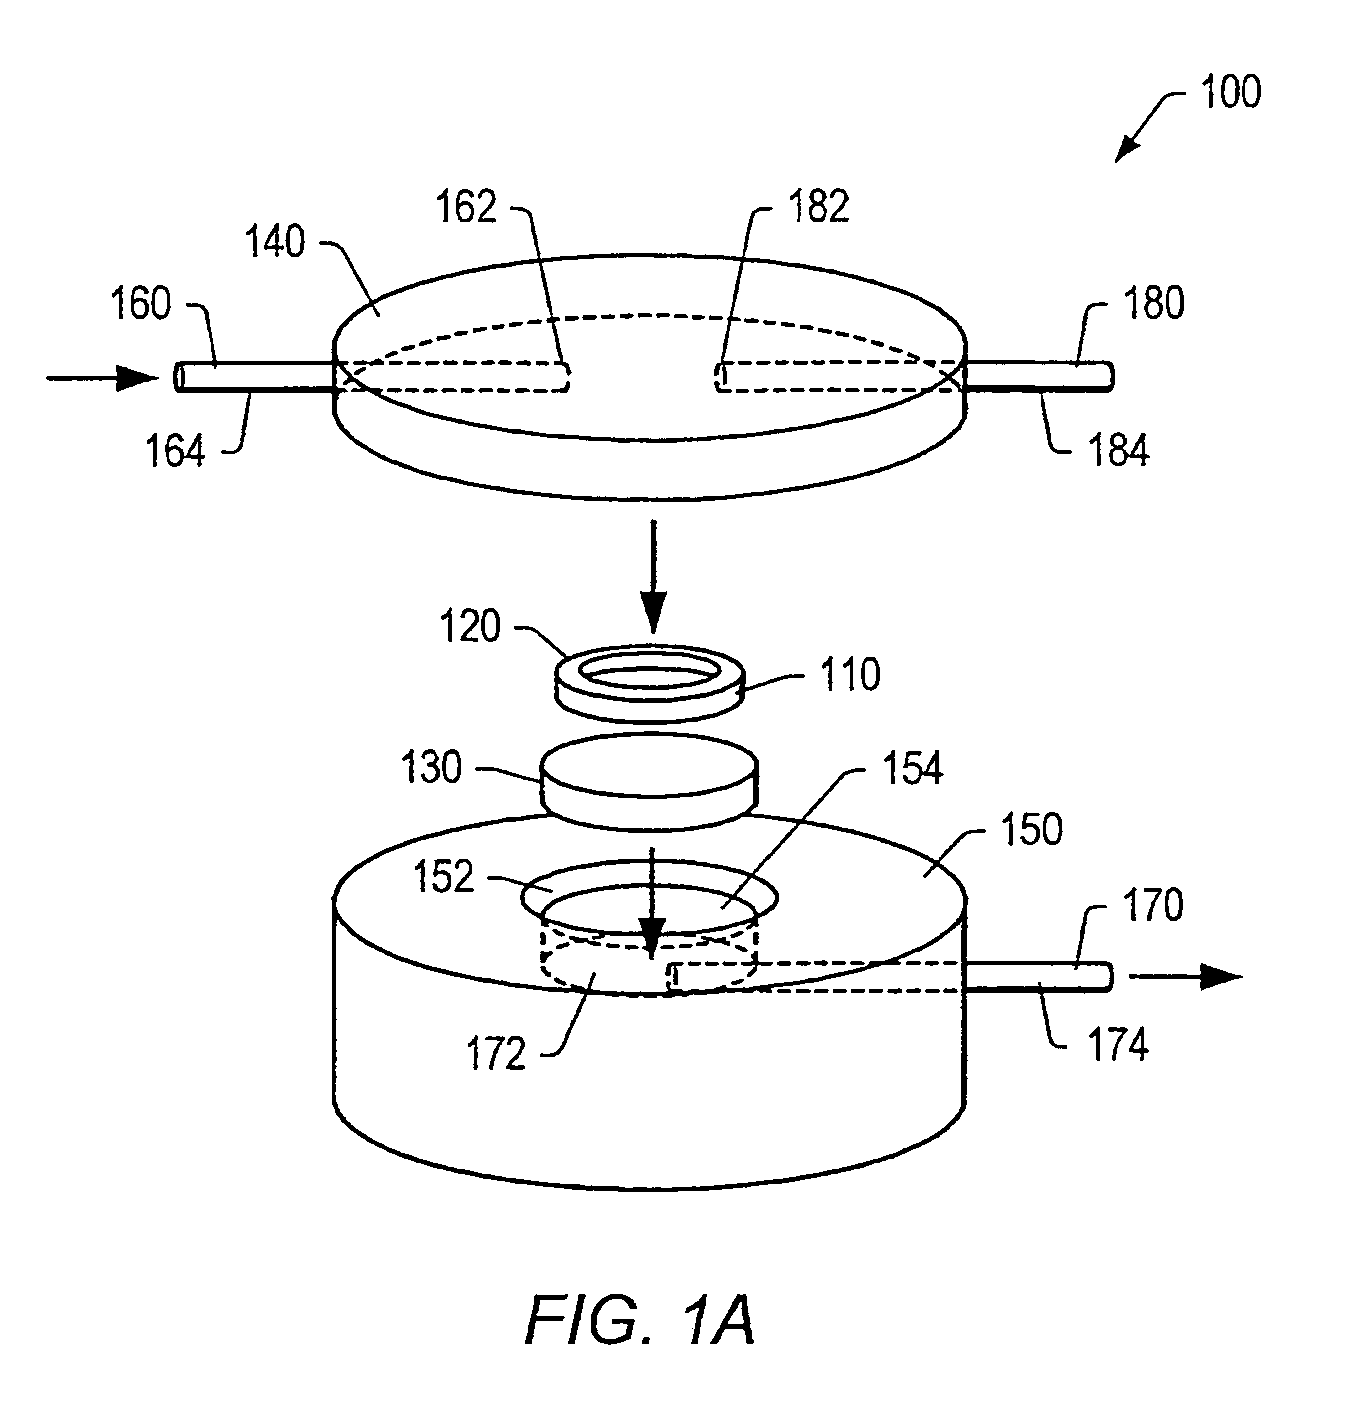 Integration of fluids and reagents into self-contained cartridges containing sensor elements